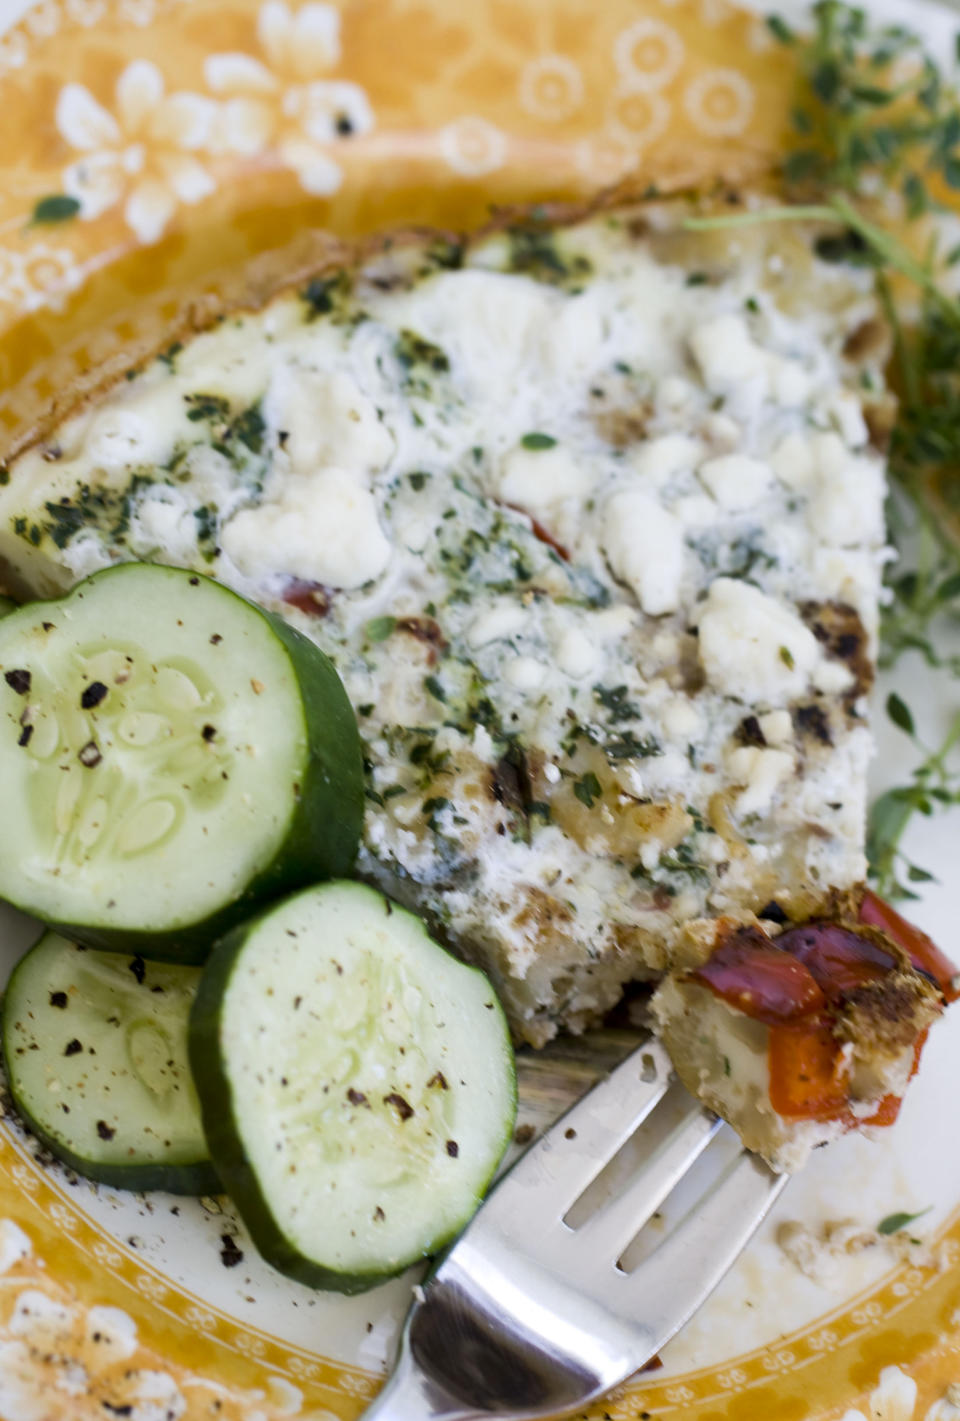 This Sept. 23, 2013 photo shows low carb cauliflower bell pepper quiche in Concord, N.H. (AP Photo/Matthew Mead)